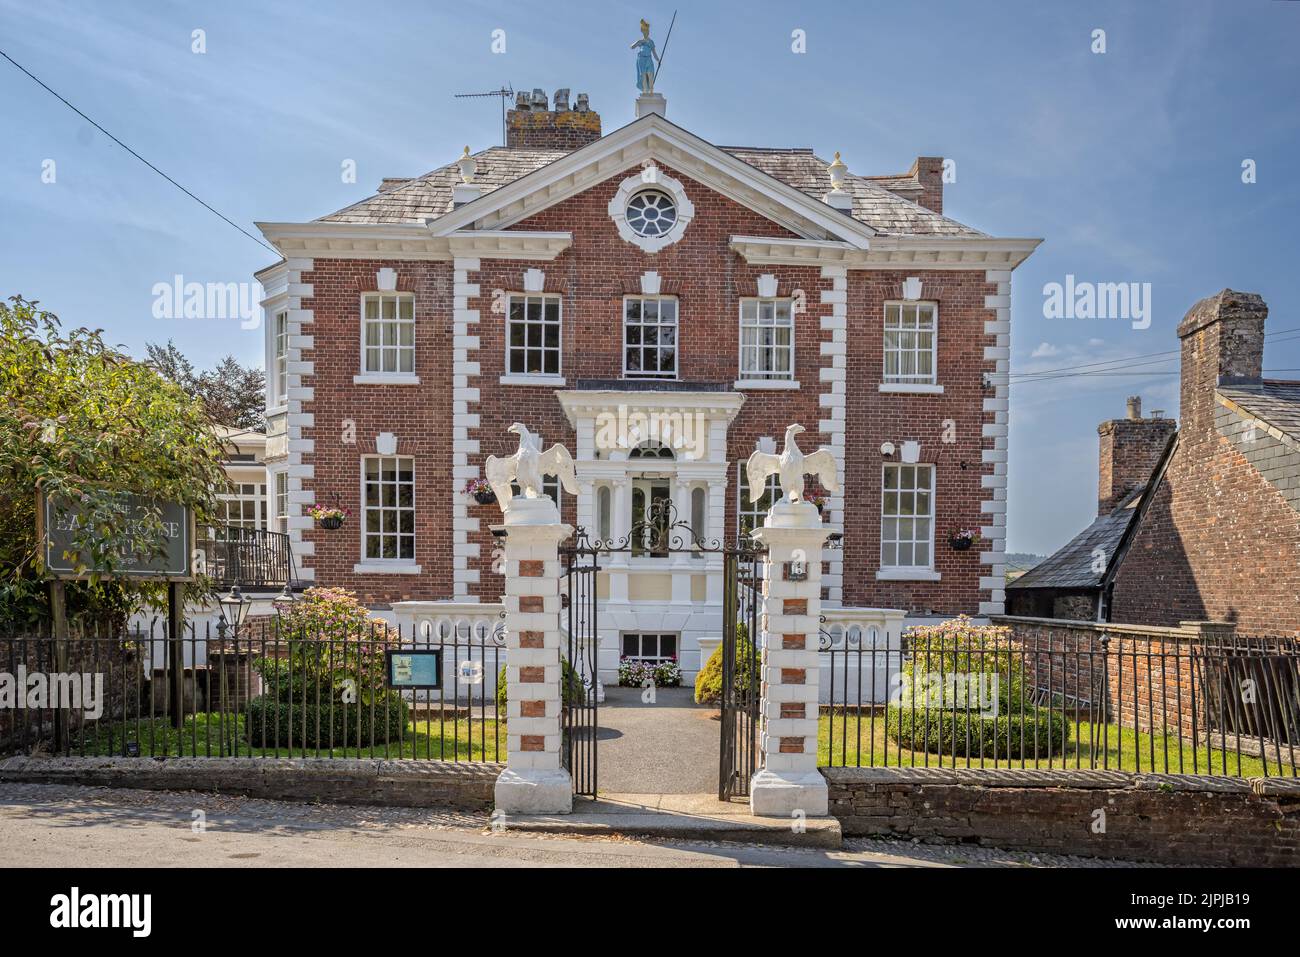 View of the front of The Eagle House Hotel - Georgian building built in 1764 - in Launceston, Cornwall, UK on 13 August 2022 Stock Photo